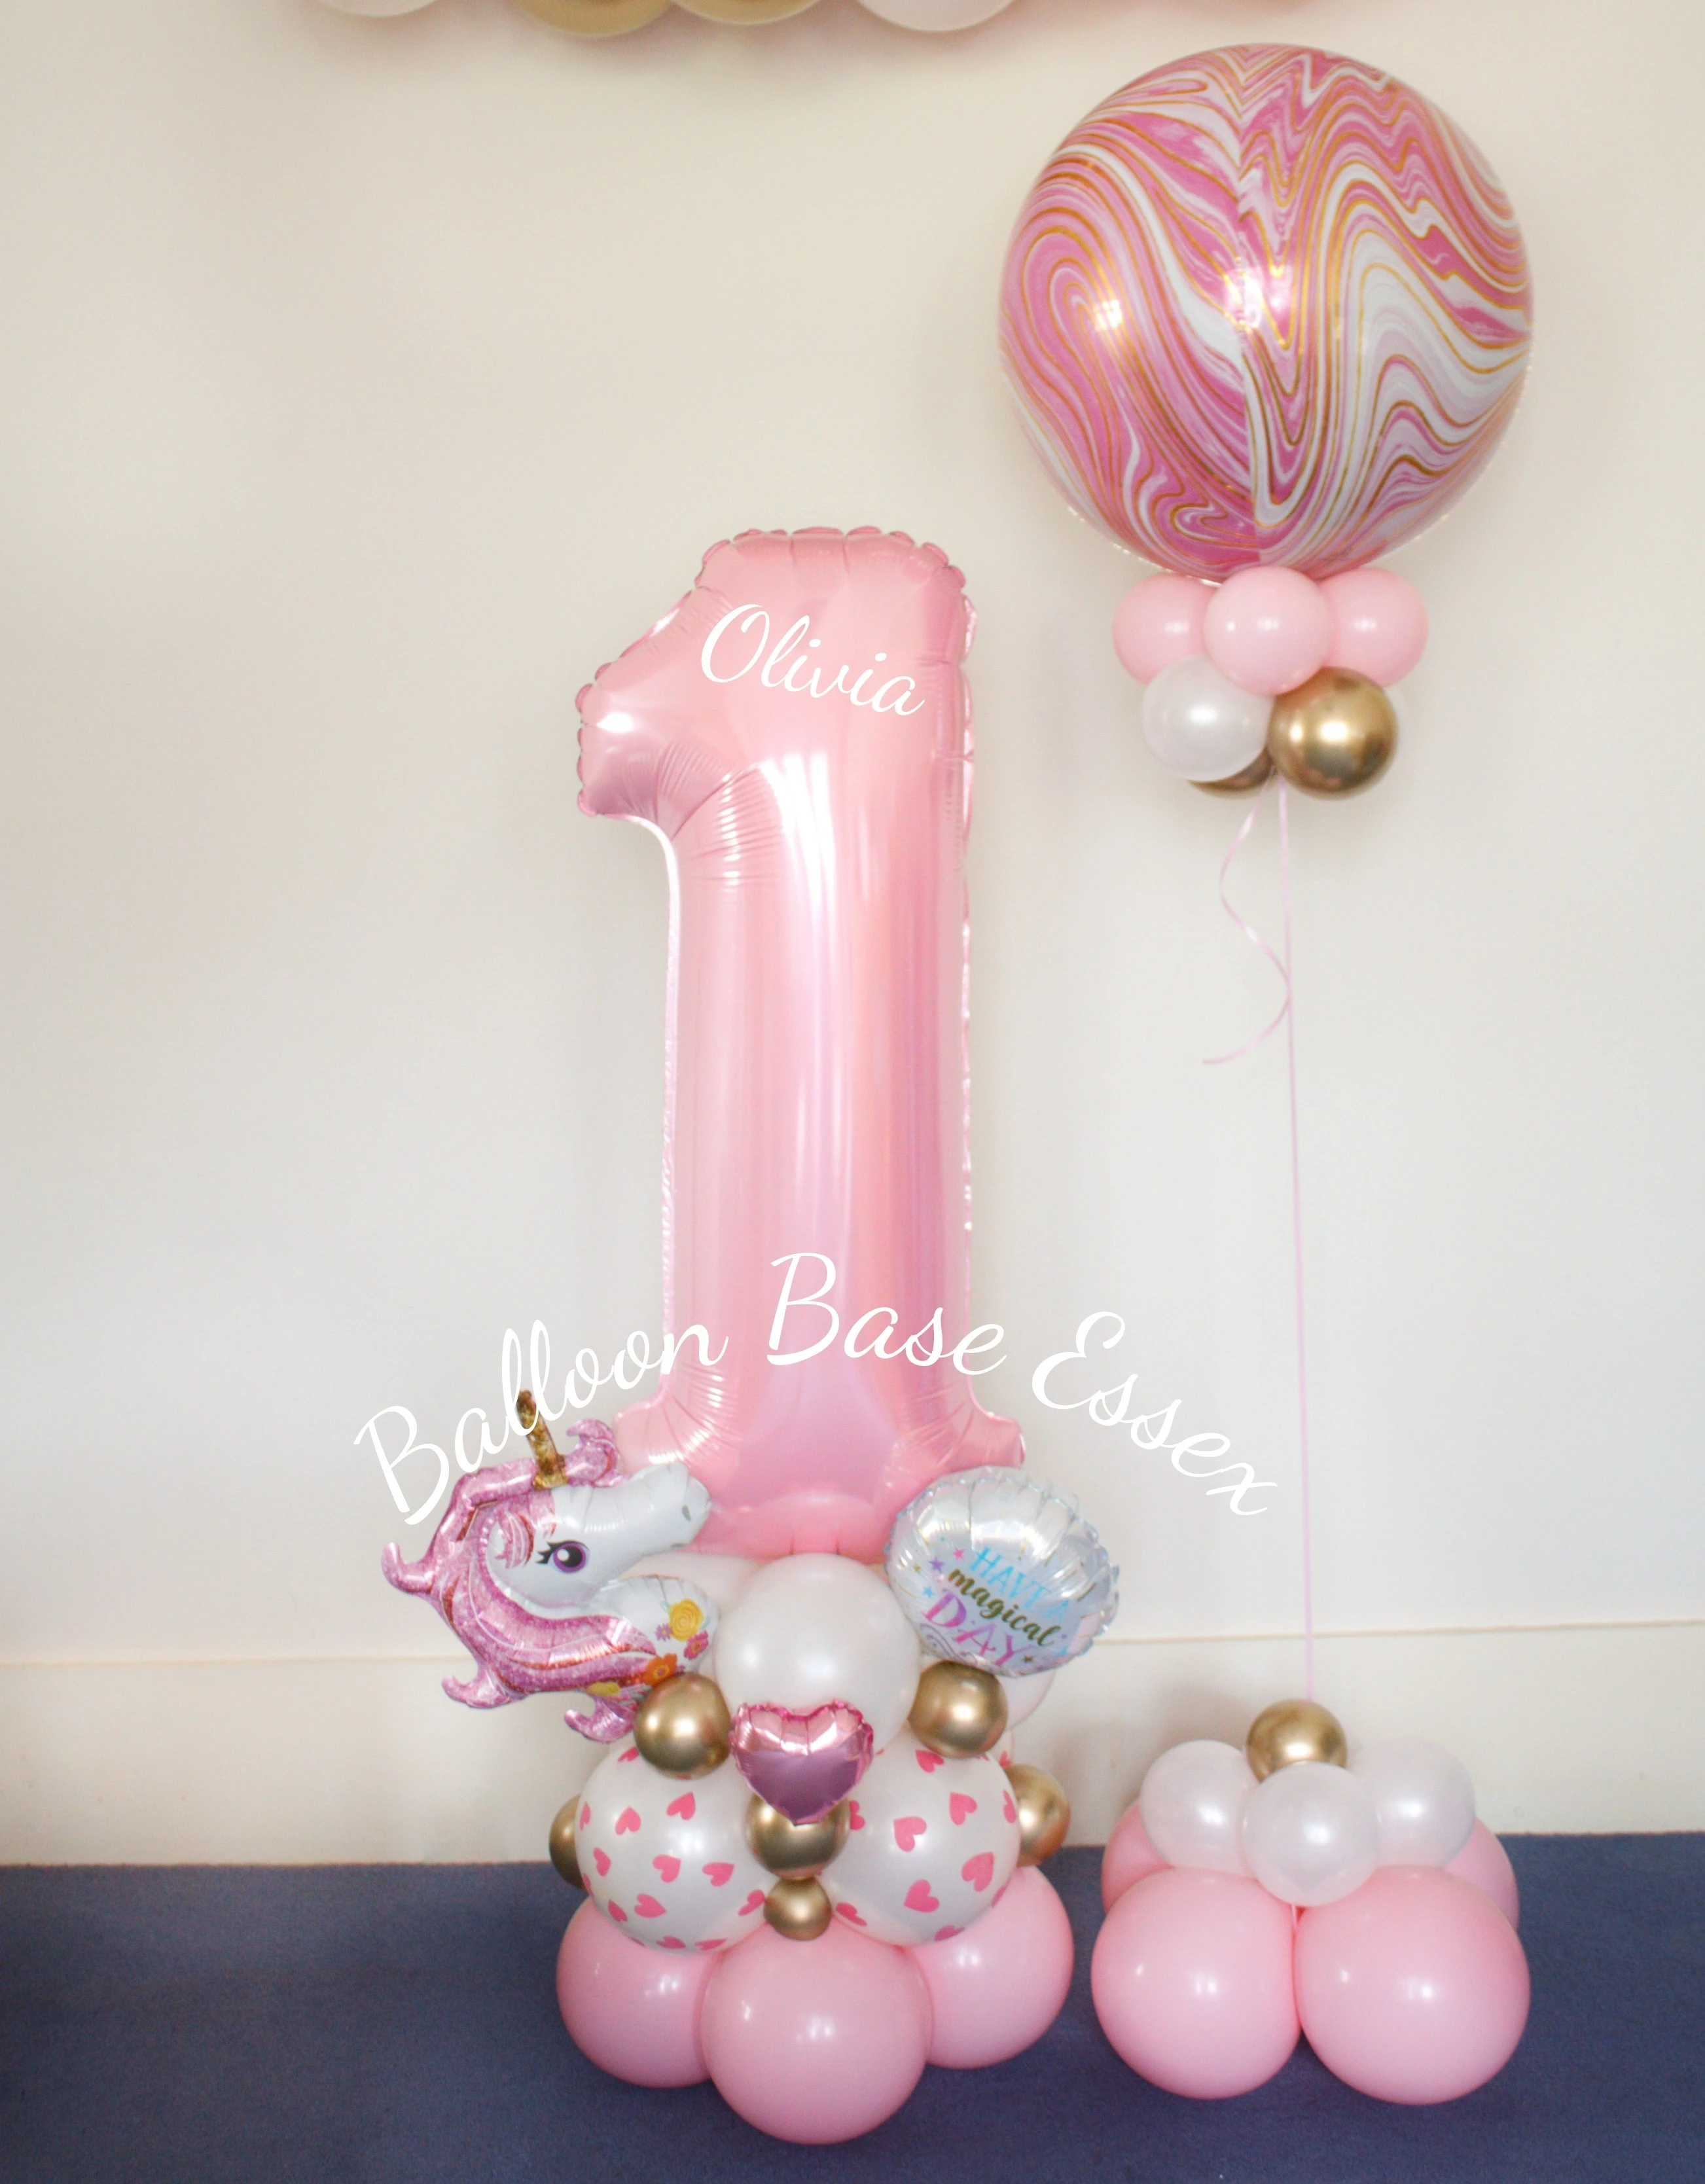 Pale pink and unicorn theme balloon stack with pink marble orbz balloon next to it